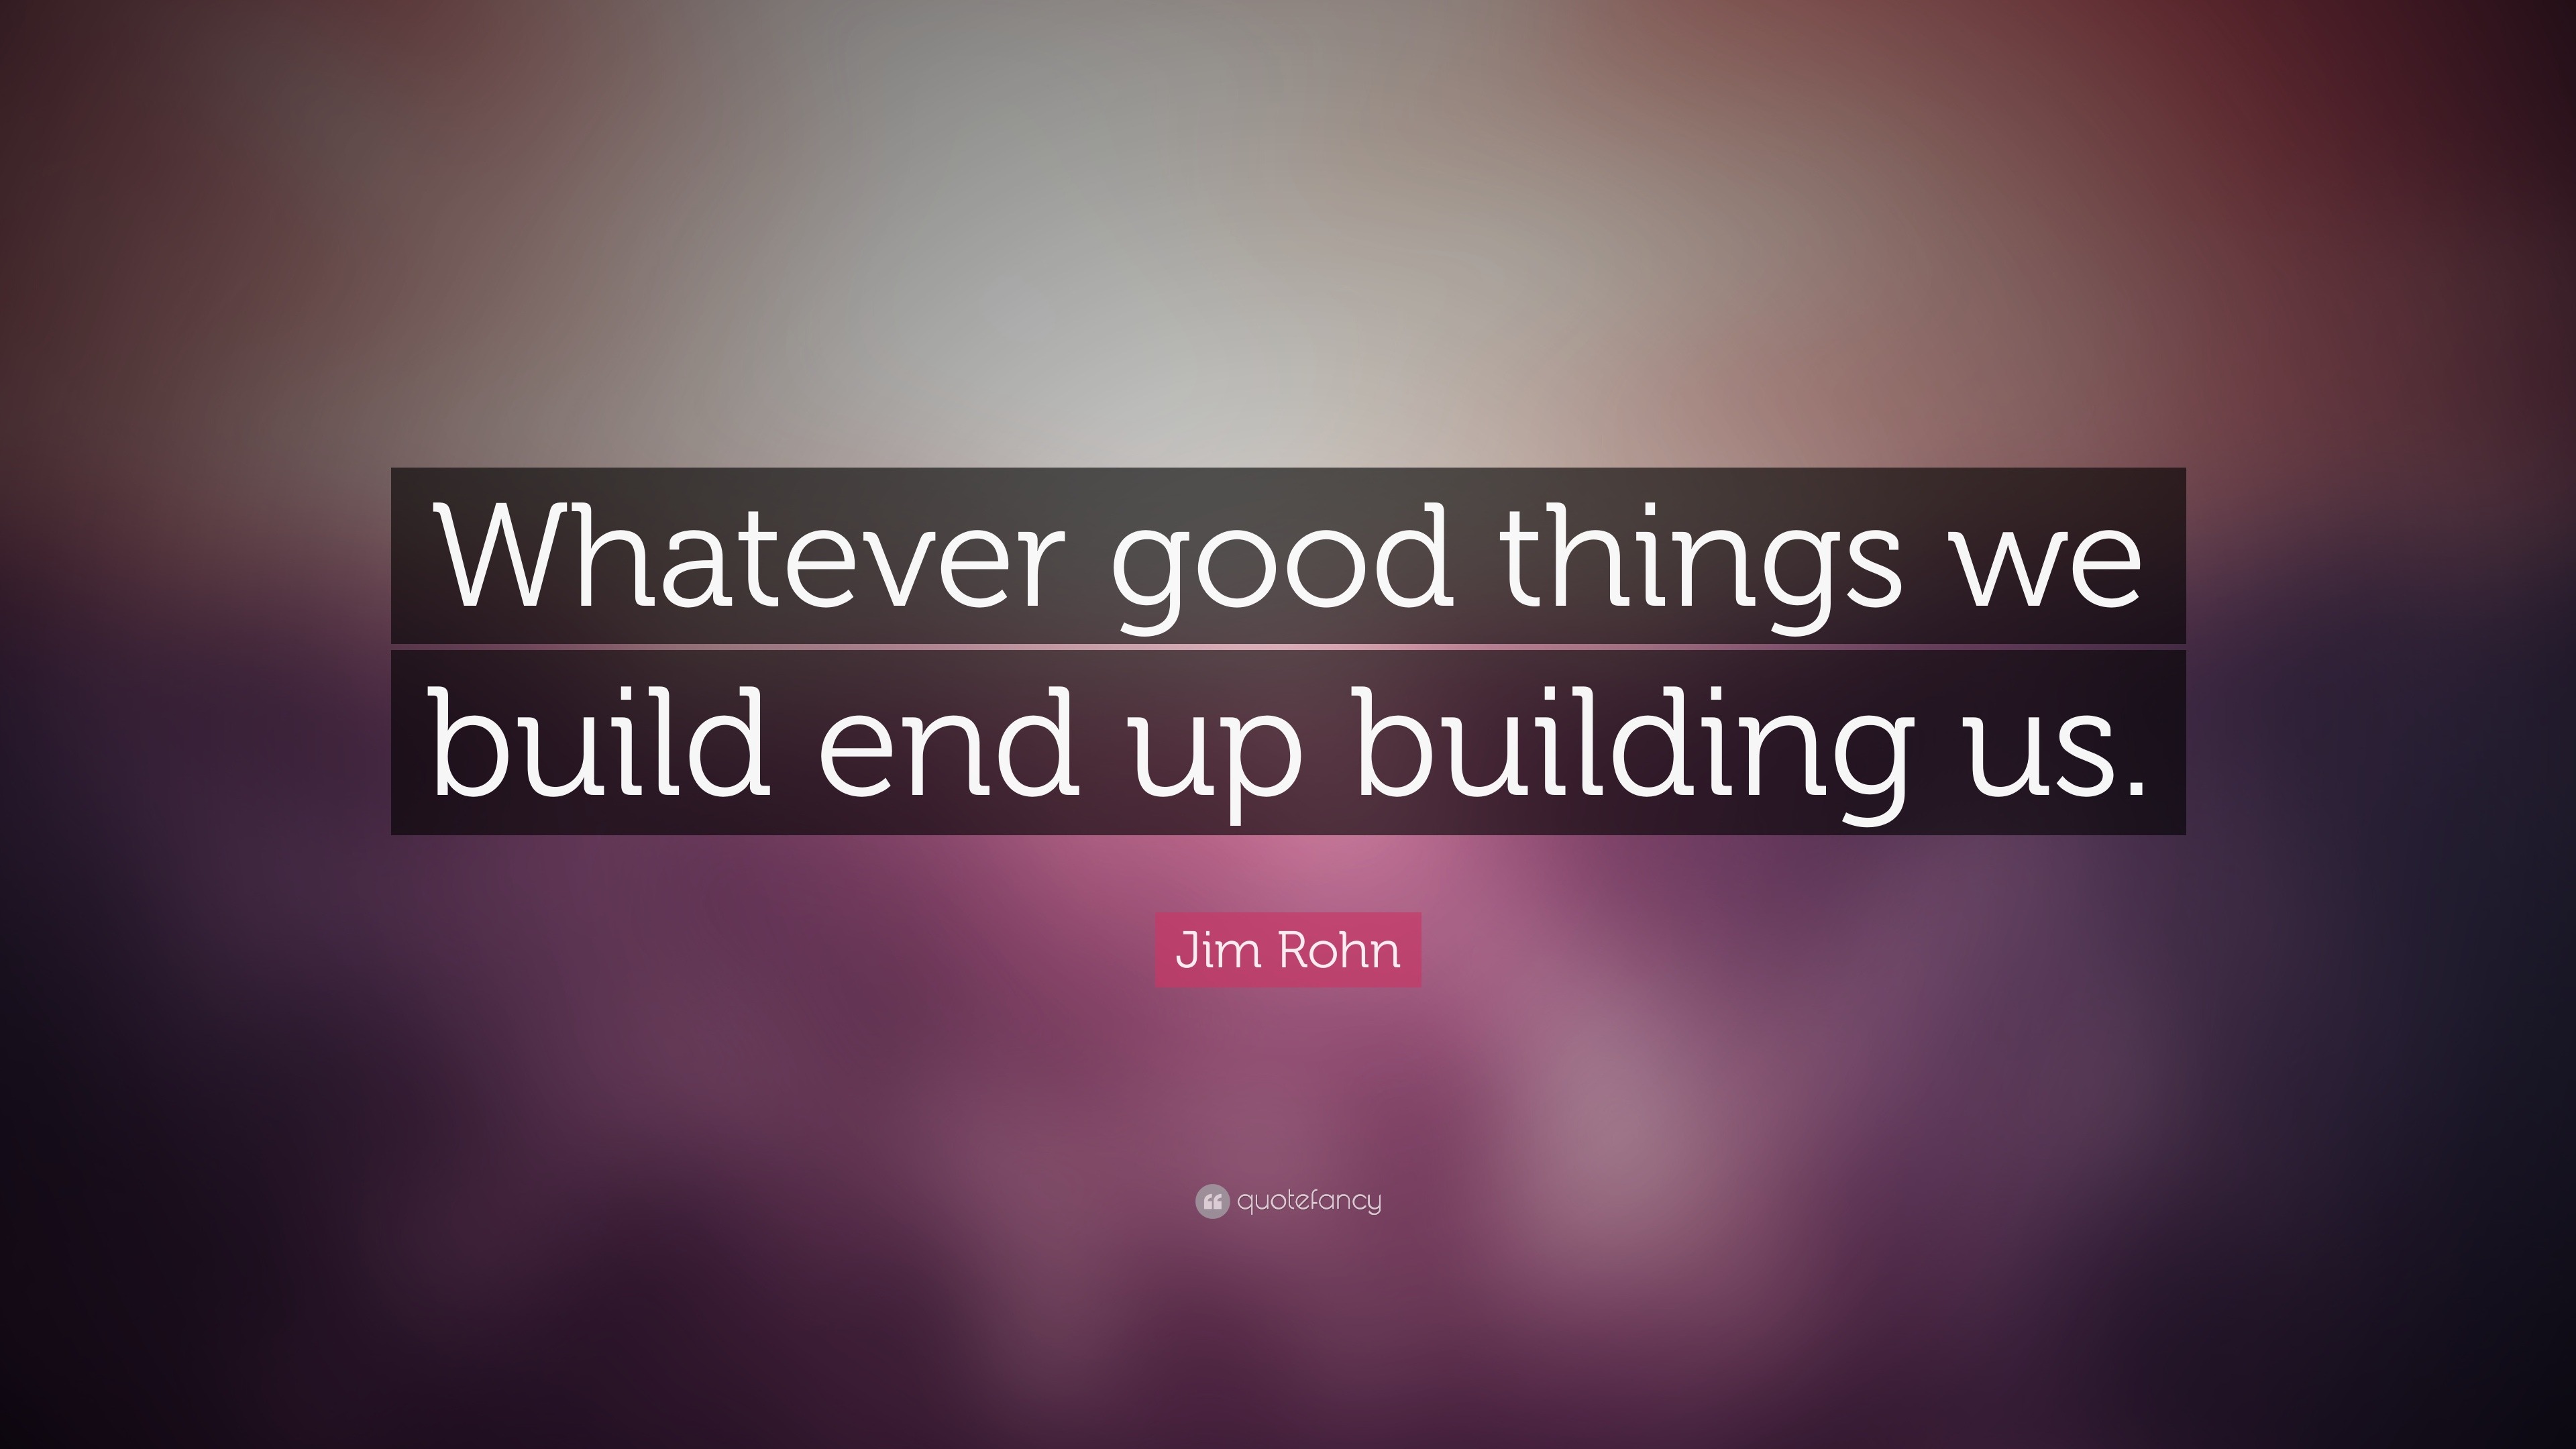 Jim Rohn Quote “Whatever good things we build end up building us.” (17